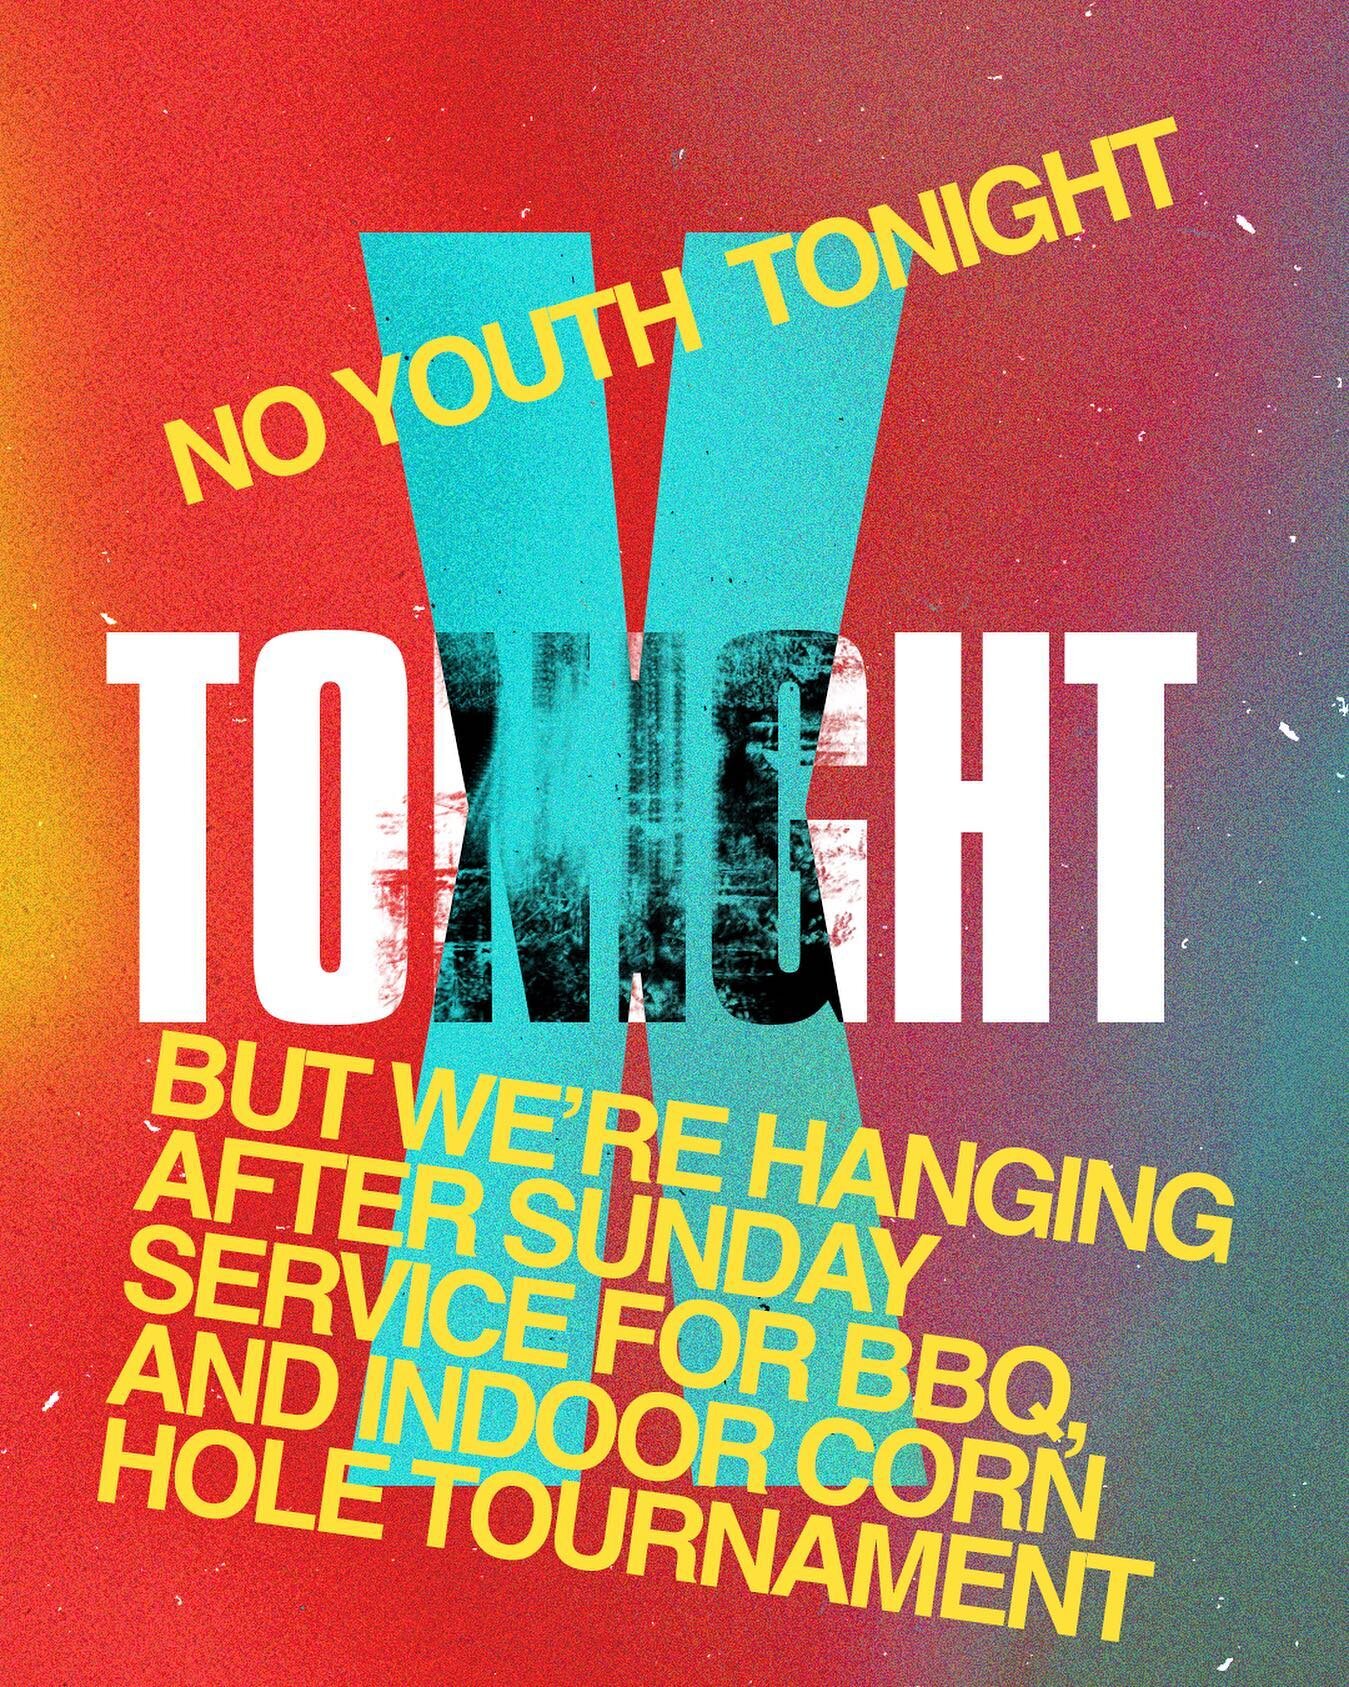 Valley Youth - No gathering tonight. But, we&rsquo;re going to hang after the Sunday gathering this coming Weekend (Sunday, July 24). So mark your calendars, tell your parents to go out to lunch or something, and be cool.